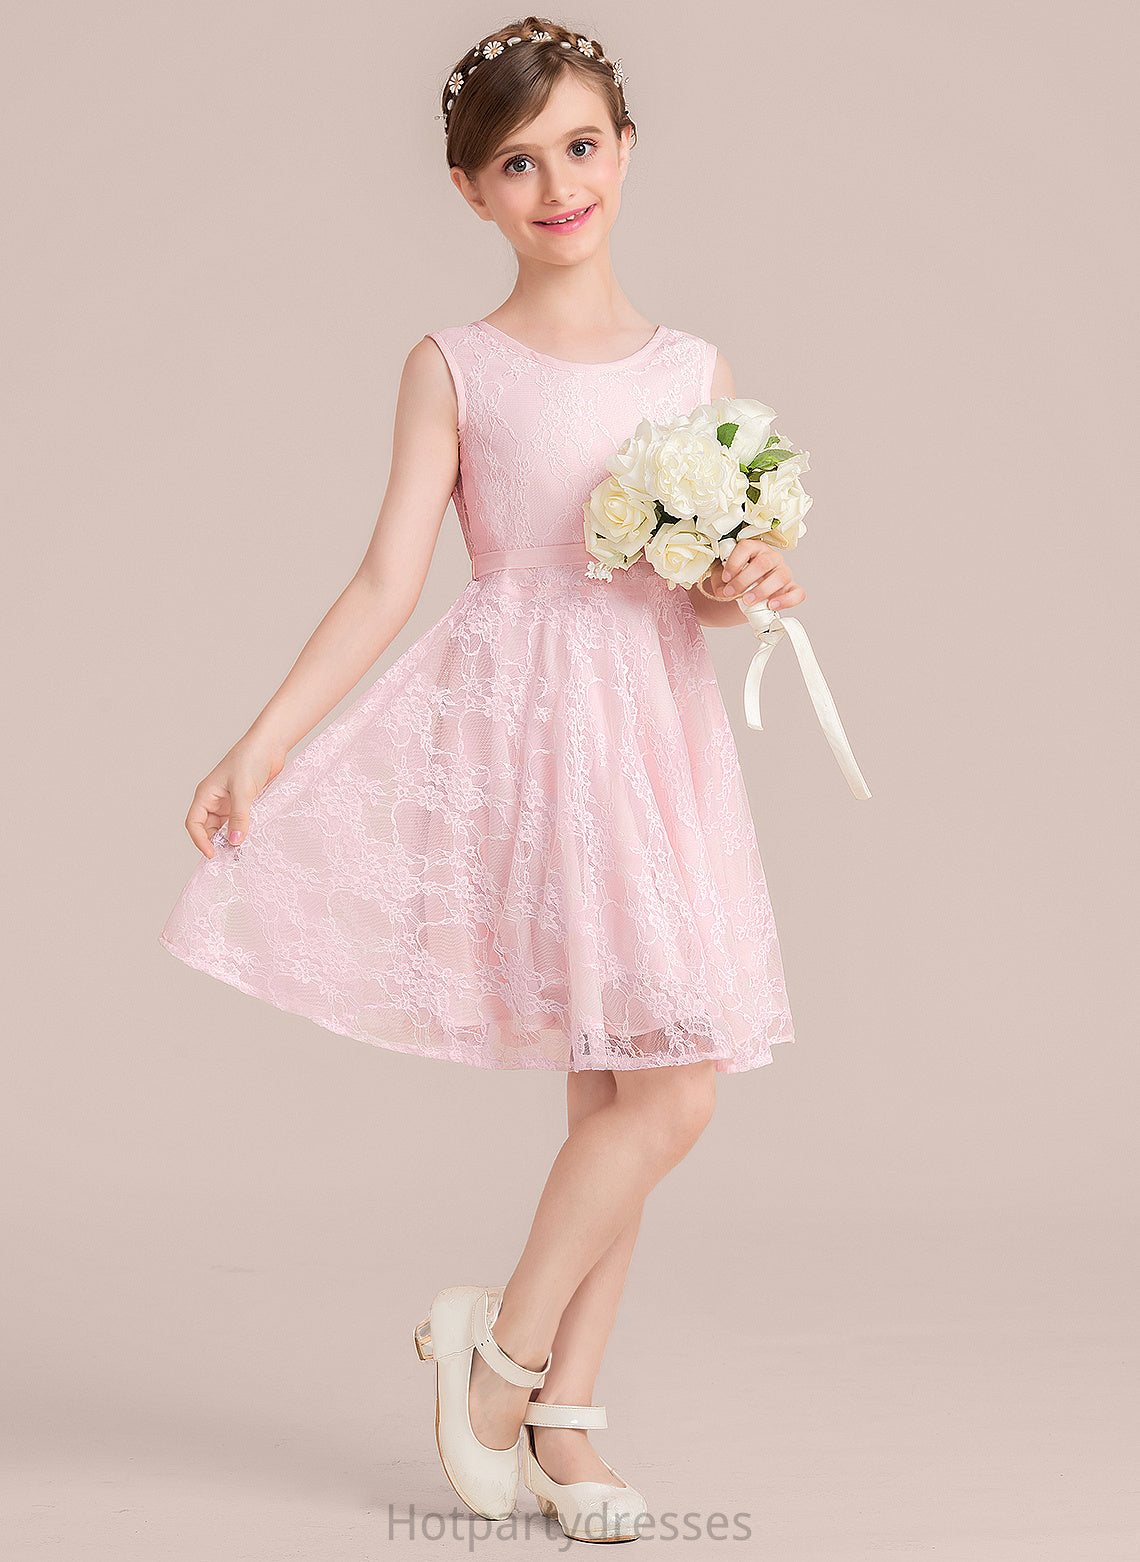 Sash A-Line Myla Bow(s) Scoop Neck With Junior Bridesmaid Dresses Lace Knee-Length